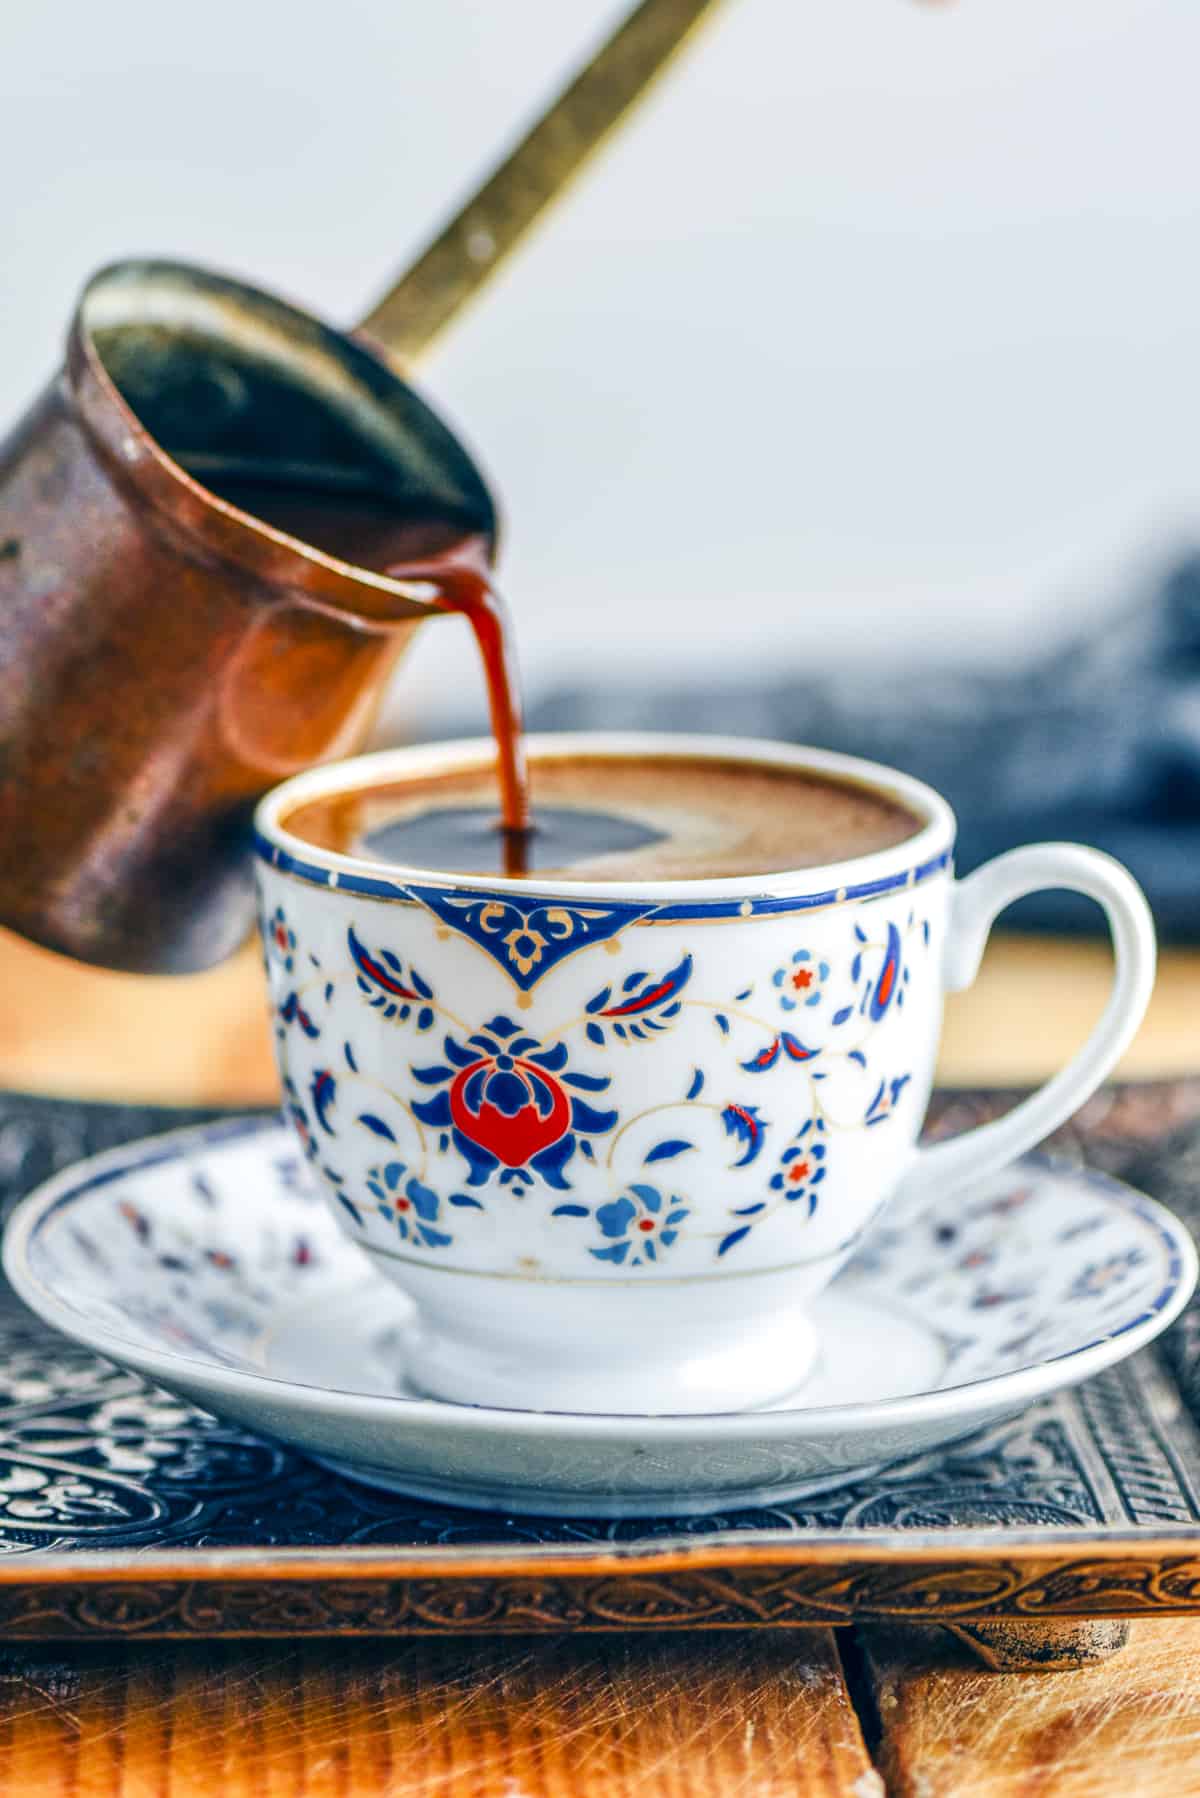 Pouring authentic Turkish coffee from a copper coffee pot into a Turkish style cup.